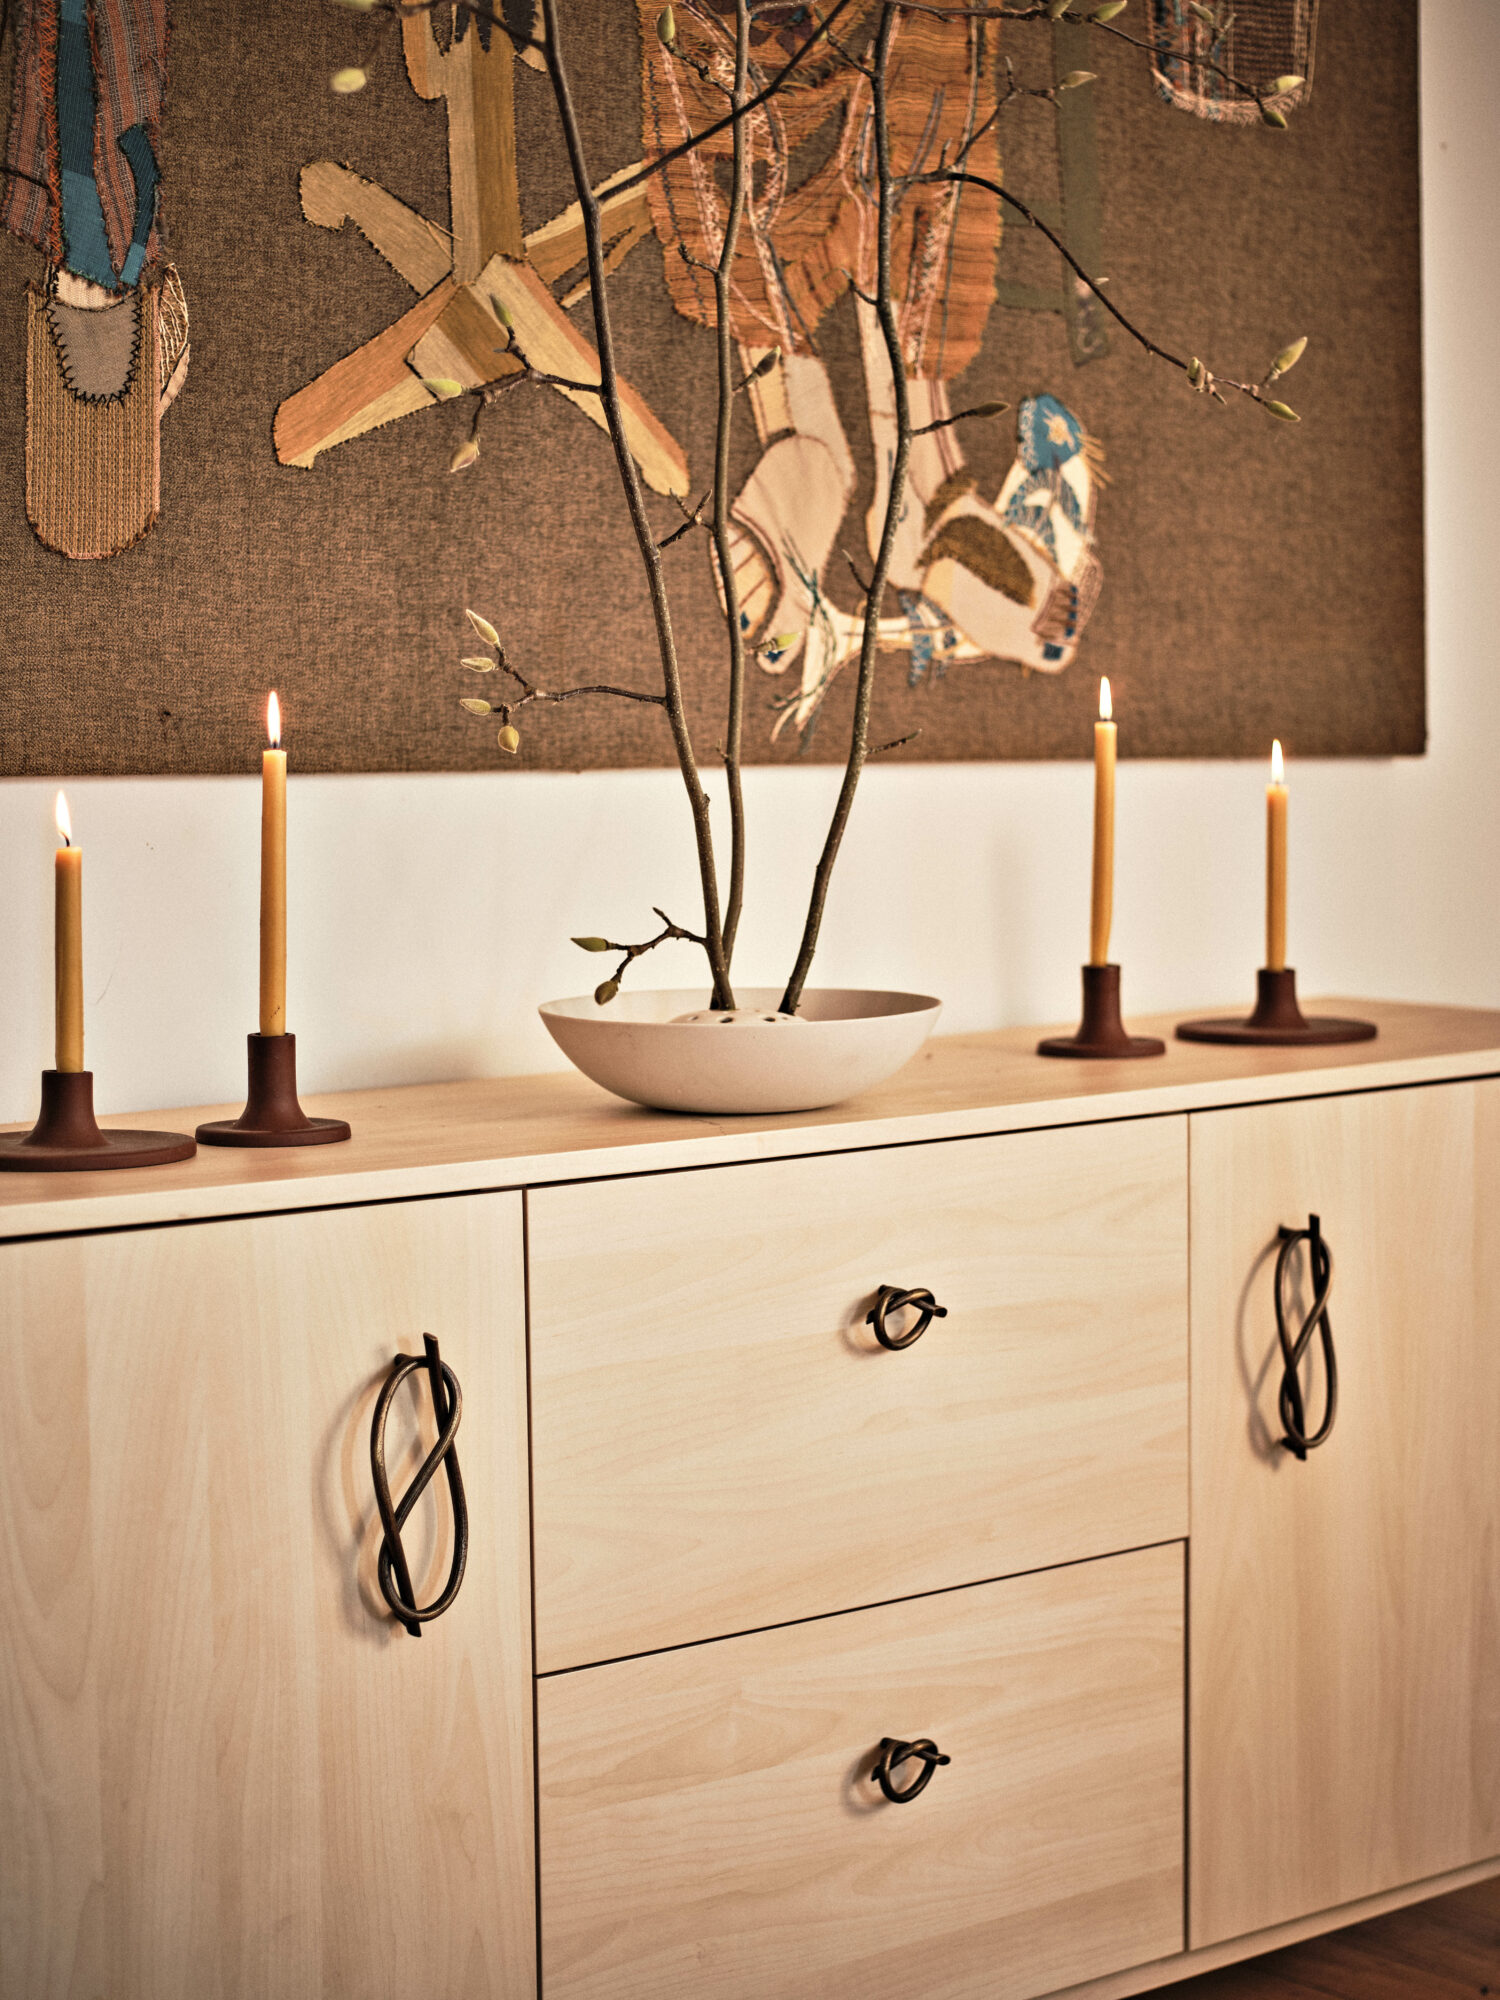 Sideboard with brass knobs, candlesticks and deco branches, part of Katie Gong x Nest Studio collab